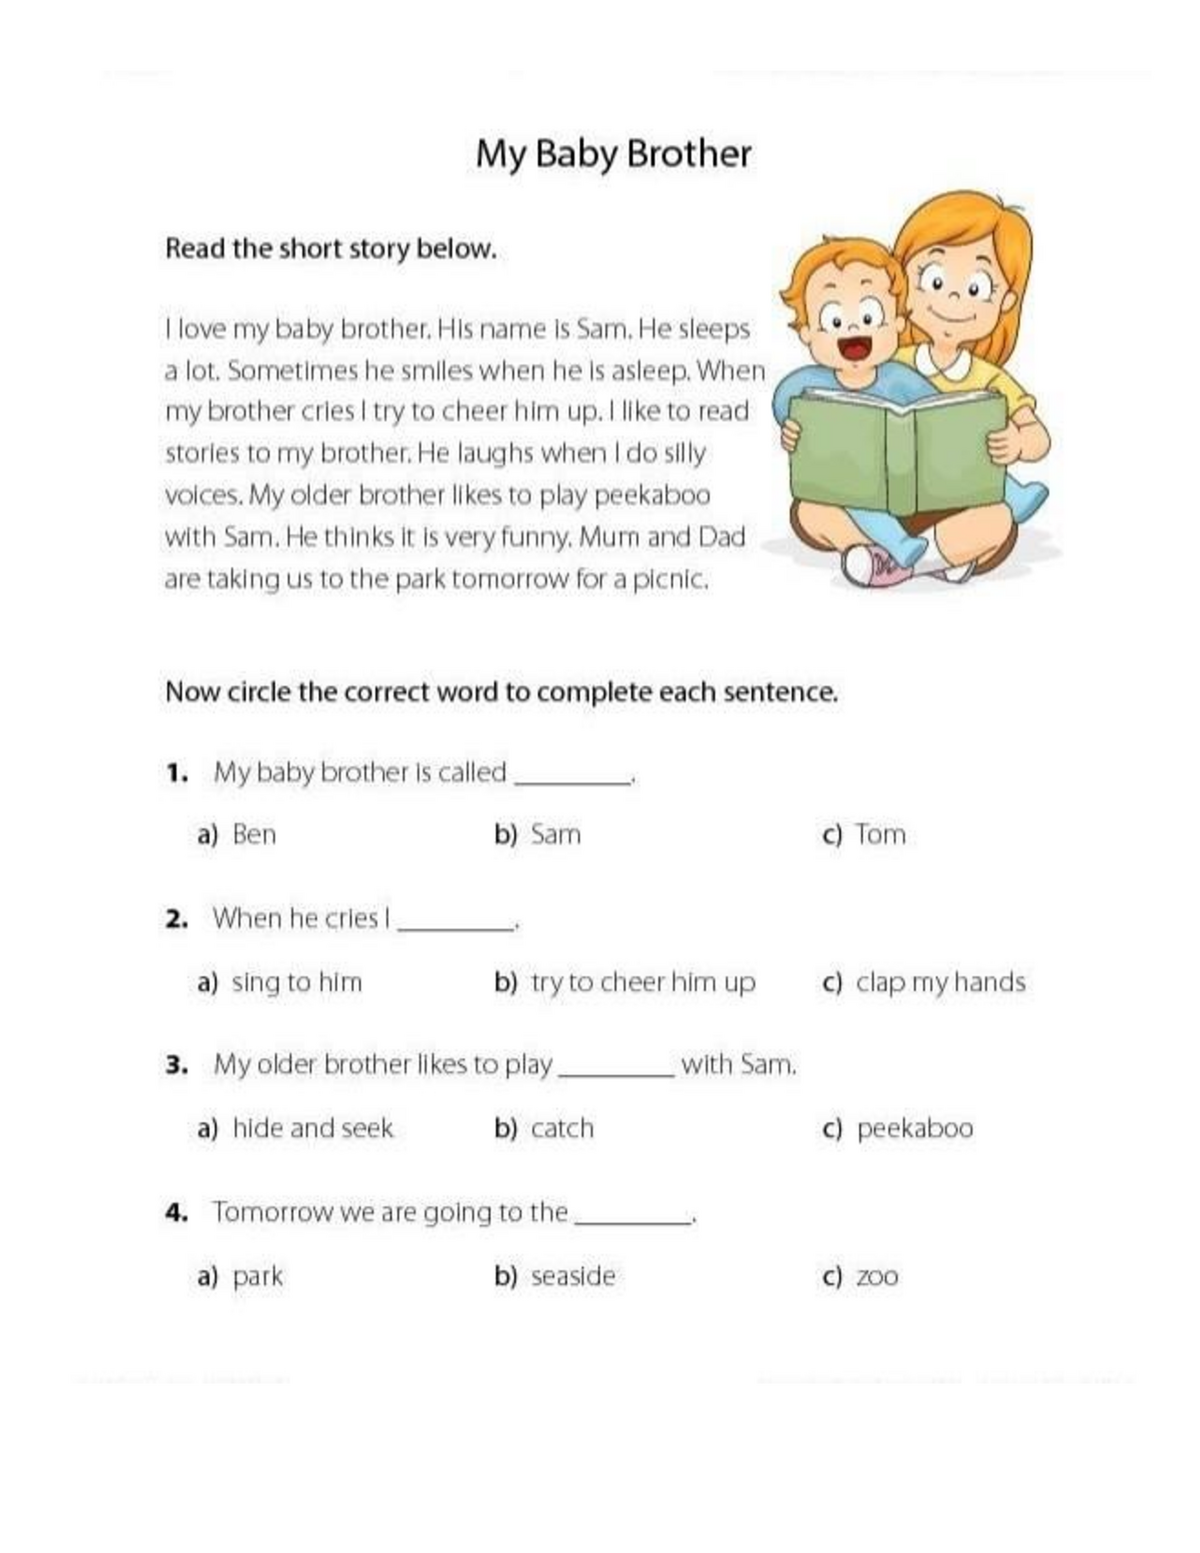 reading-comprehension-worksheets-for-grade-5-professional-education